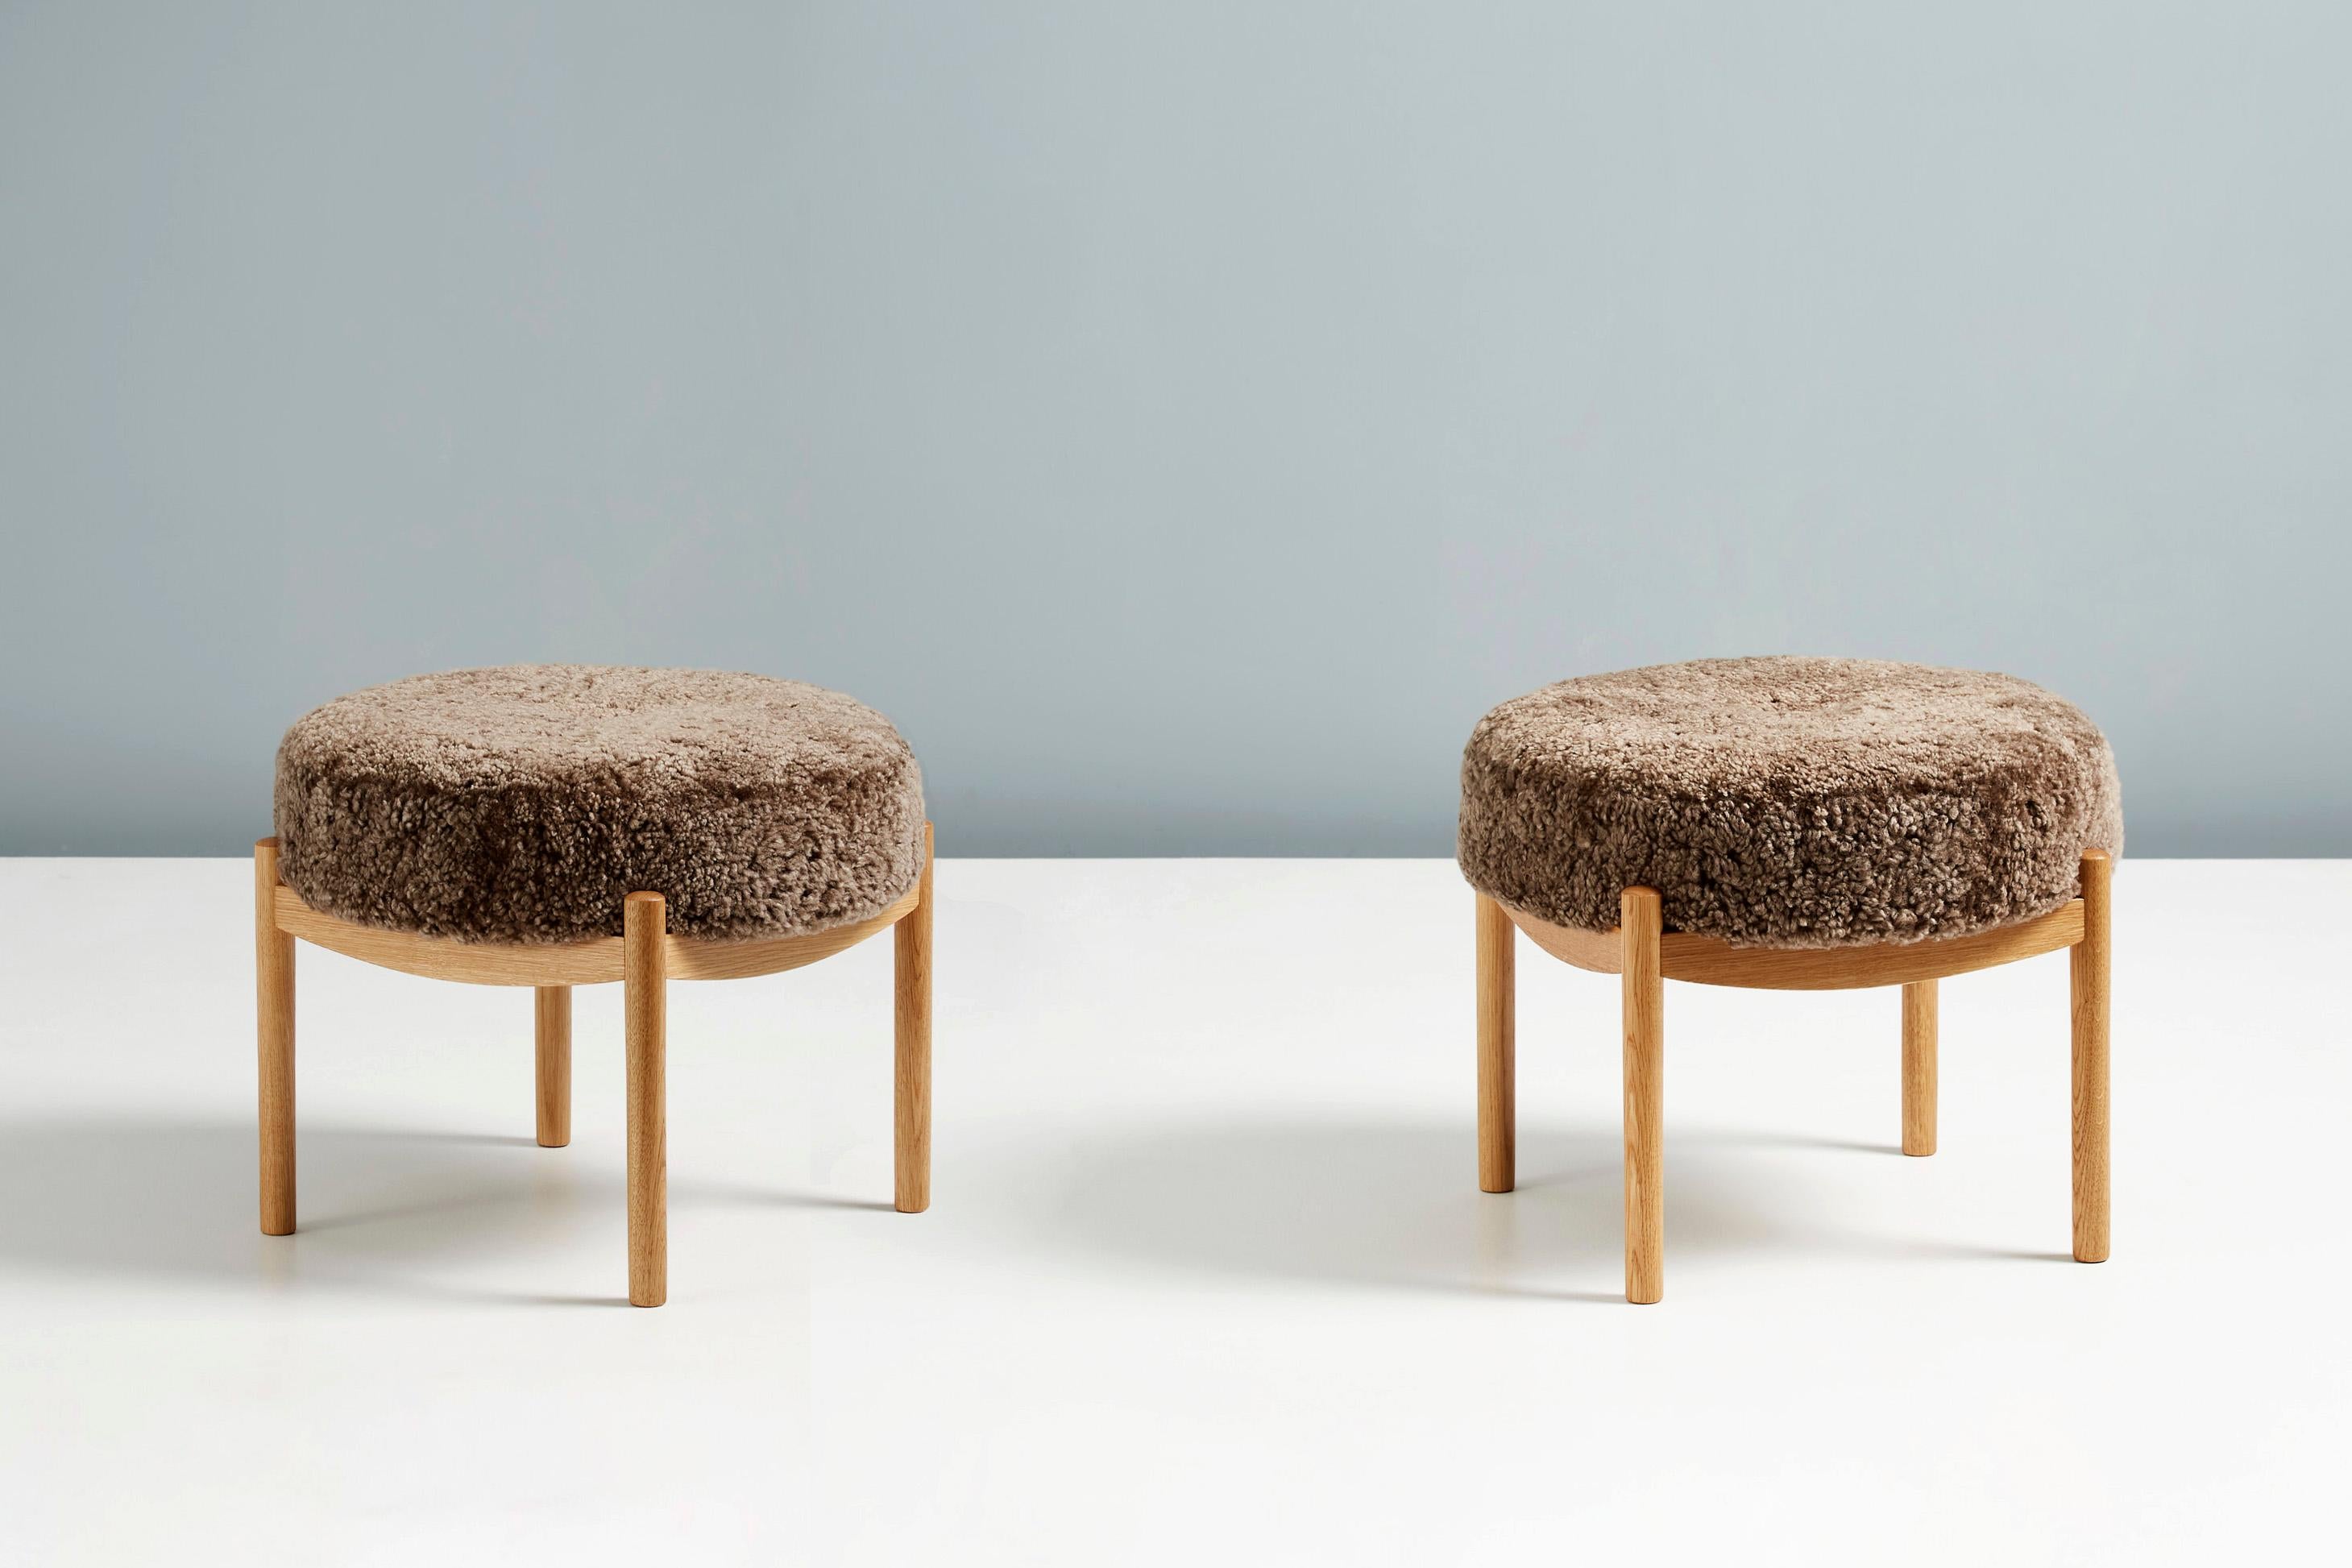 Dagmar Design Custom-Made Esko Stool

A pair of custom-made round stools with solid oiled oak frames, developed & produced at our workshops in London. These examples have seats upholstered in Sahara brown sheepskin. The Esko stool is available to